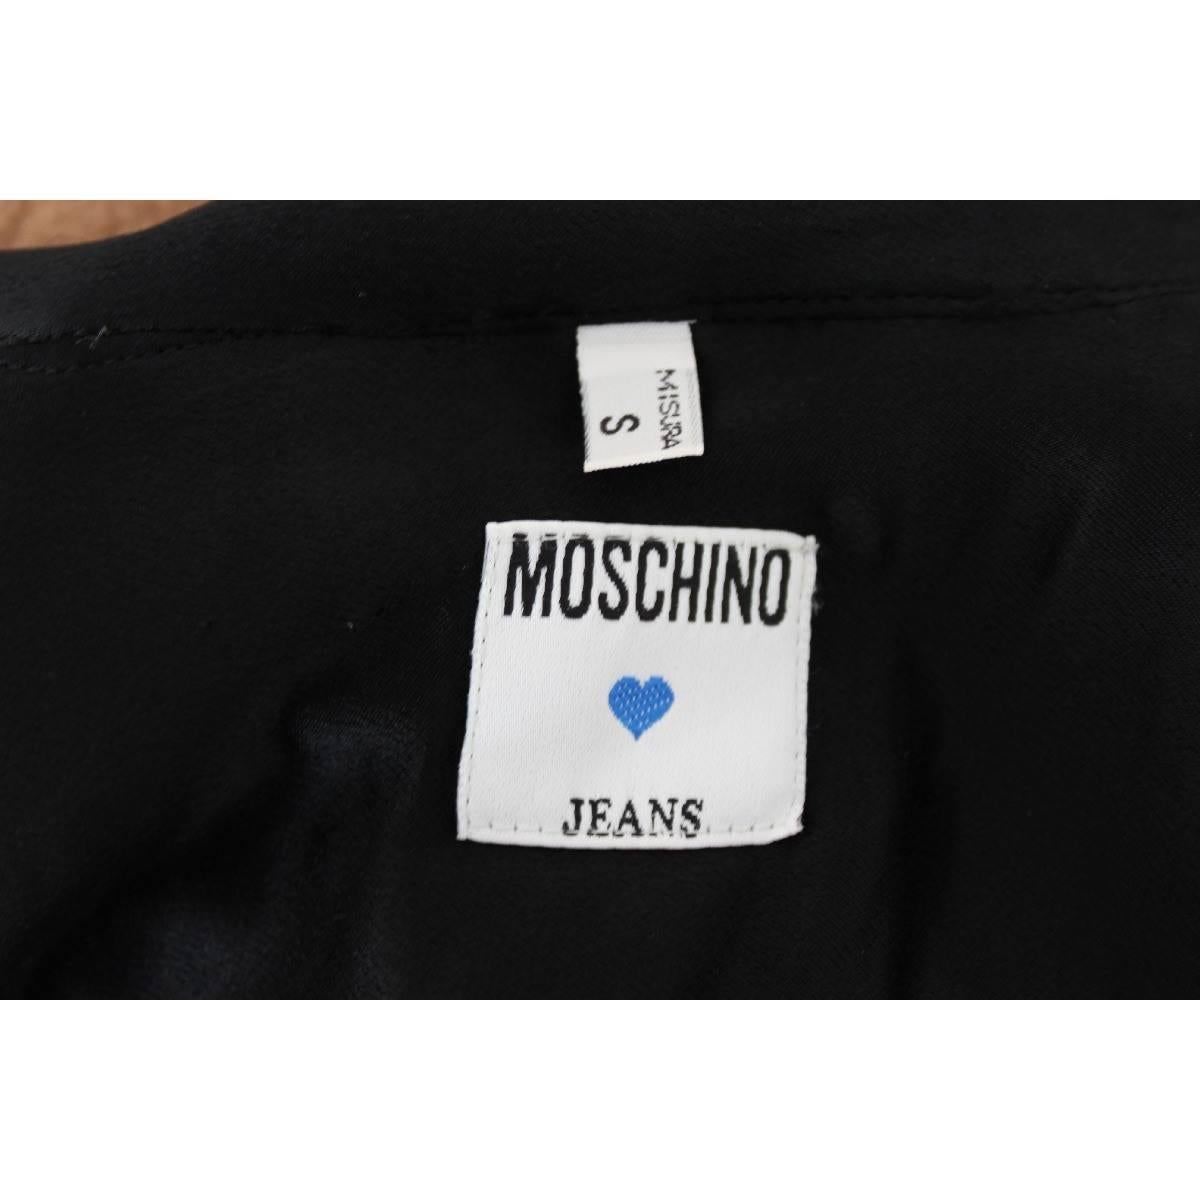 Women's or Men's Moschino shirt black vintage multicolored wool shoulder slim fit 1980s polo neck For Sale